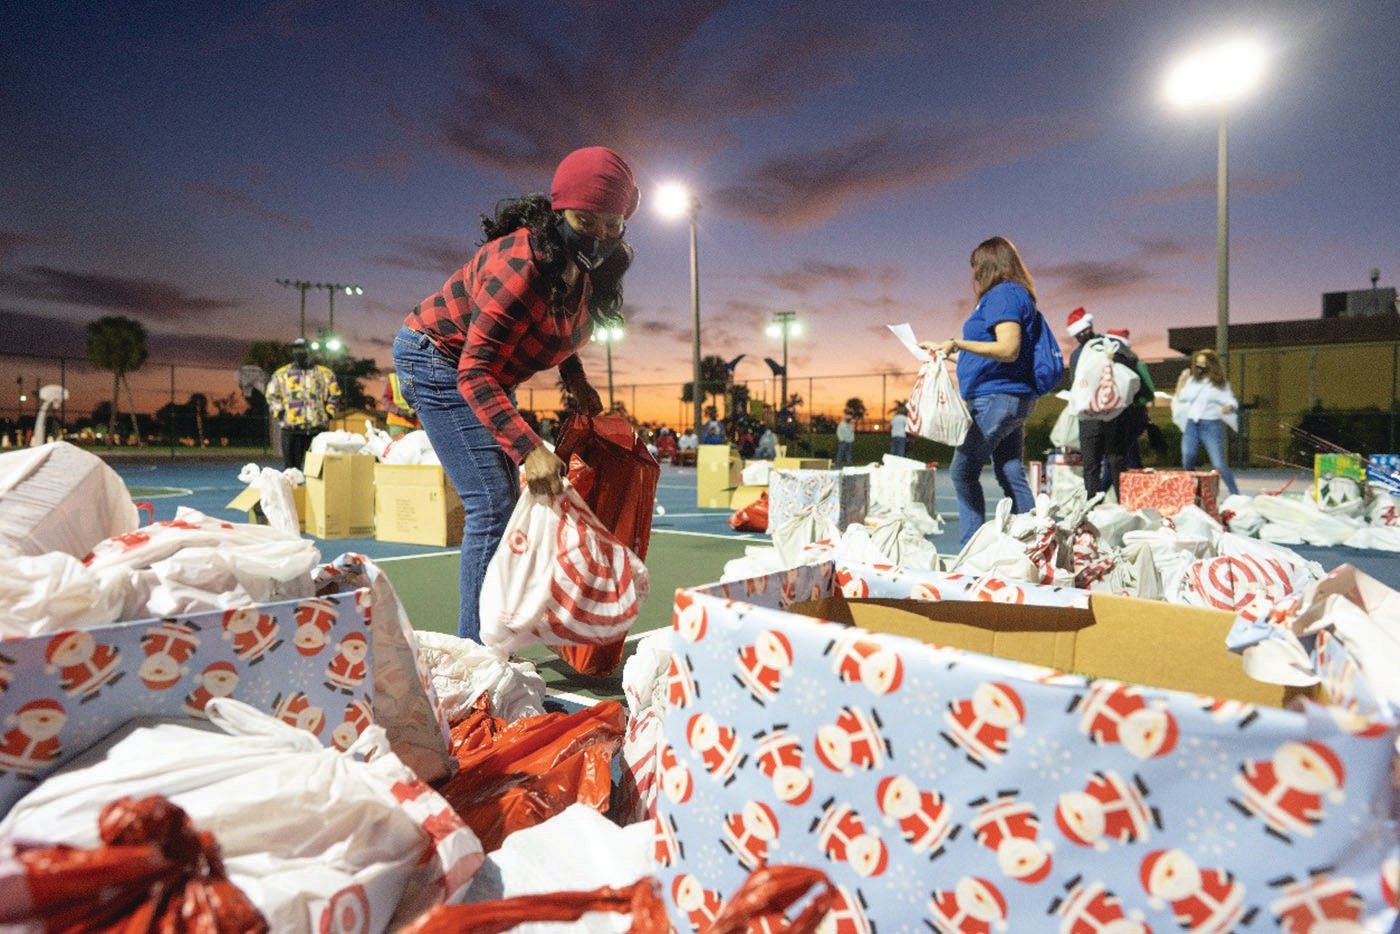 Volunteers help with sorting gifts to be delivered to families and local teenagers.